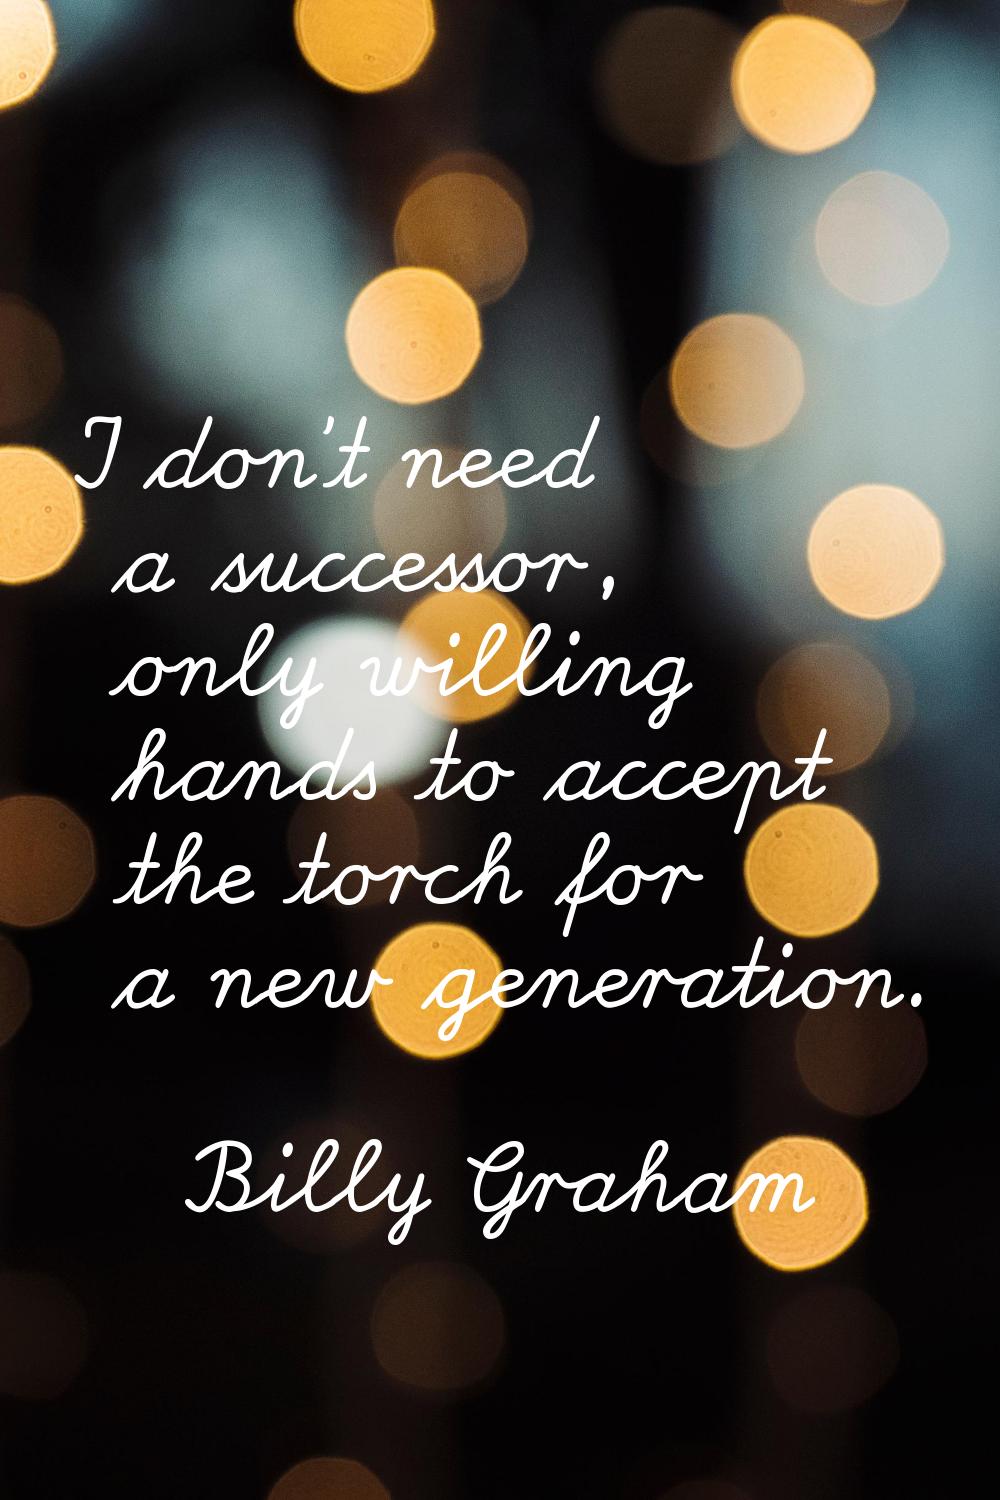 I don't need a successor, only willing hands to accept the torch for a new generation.